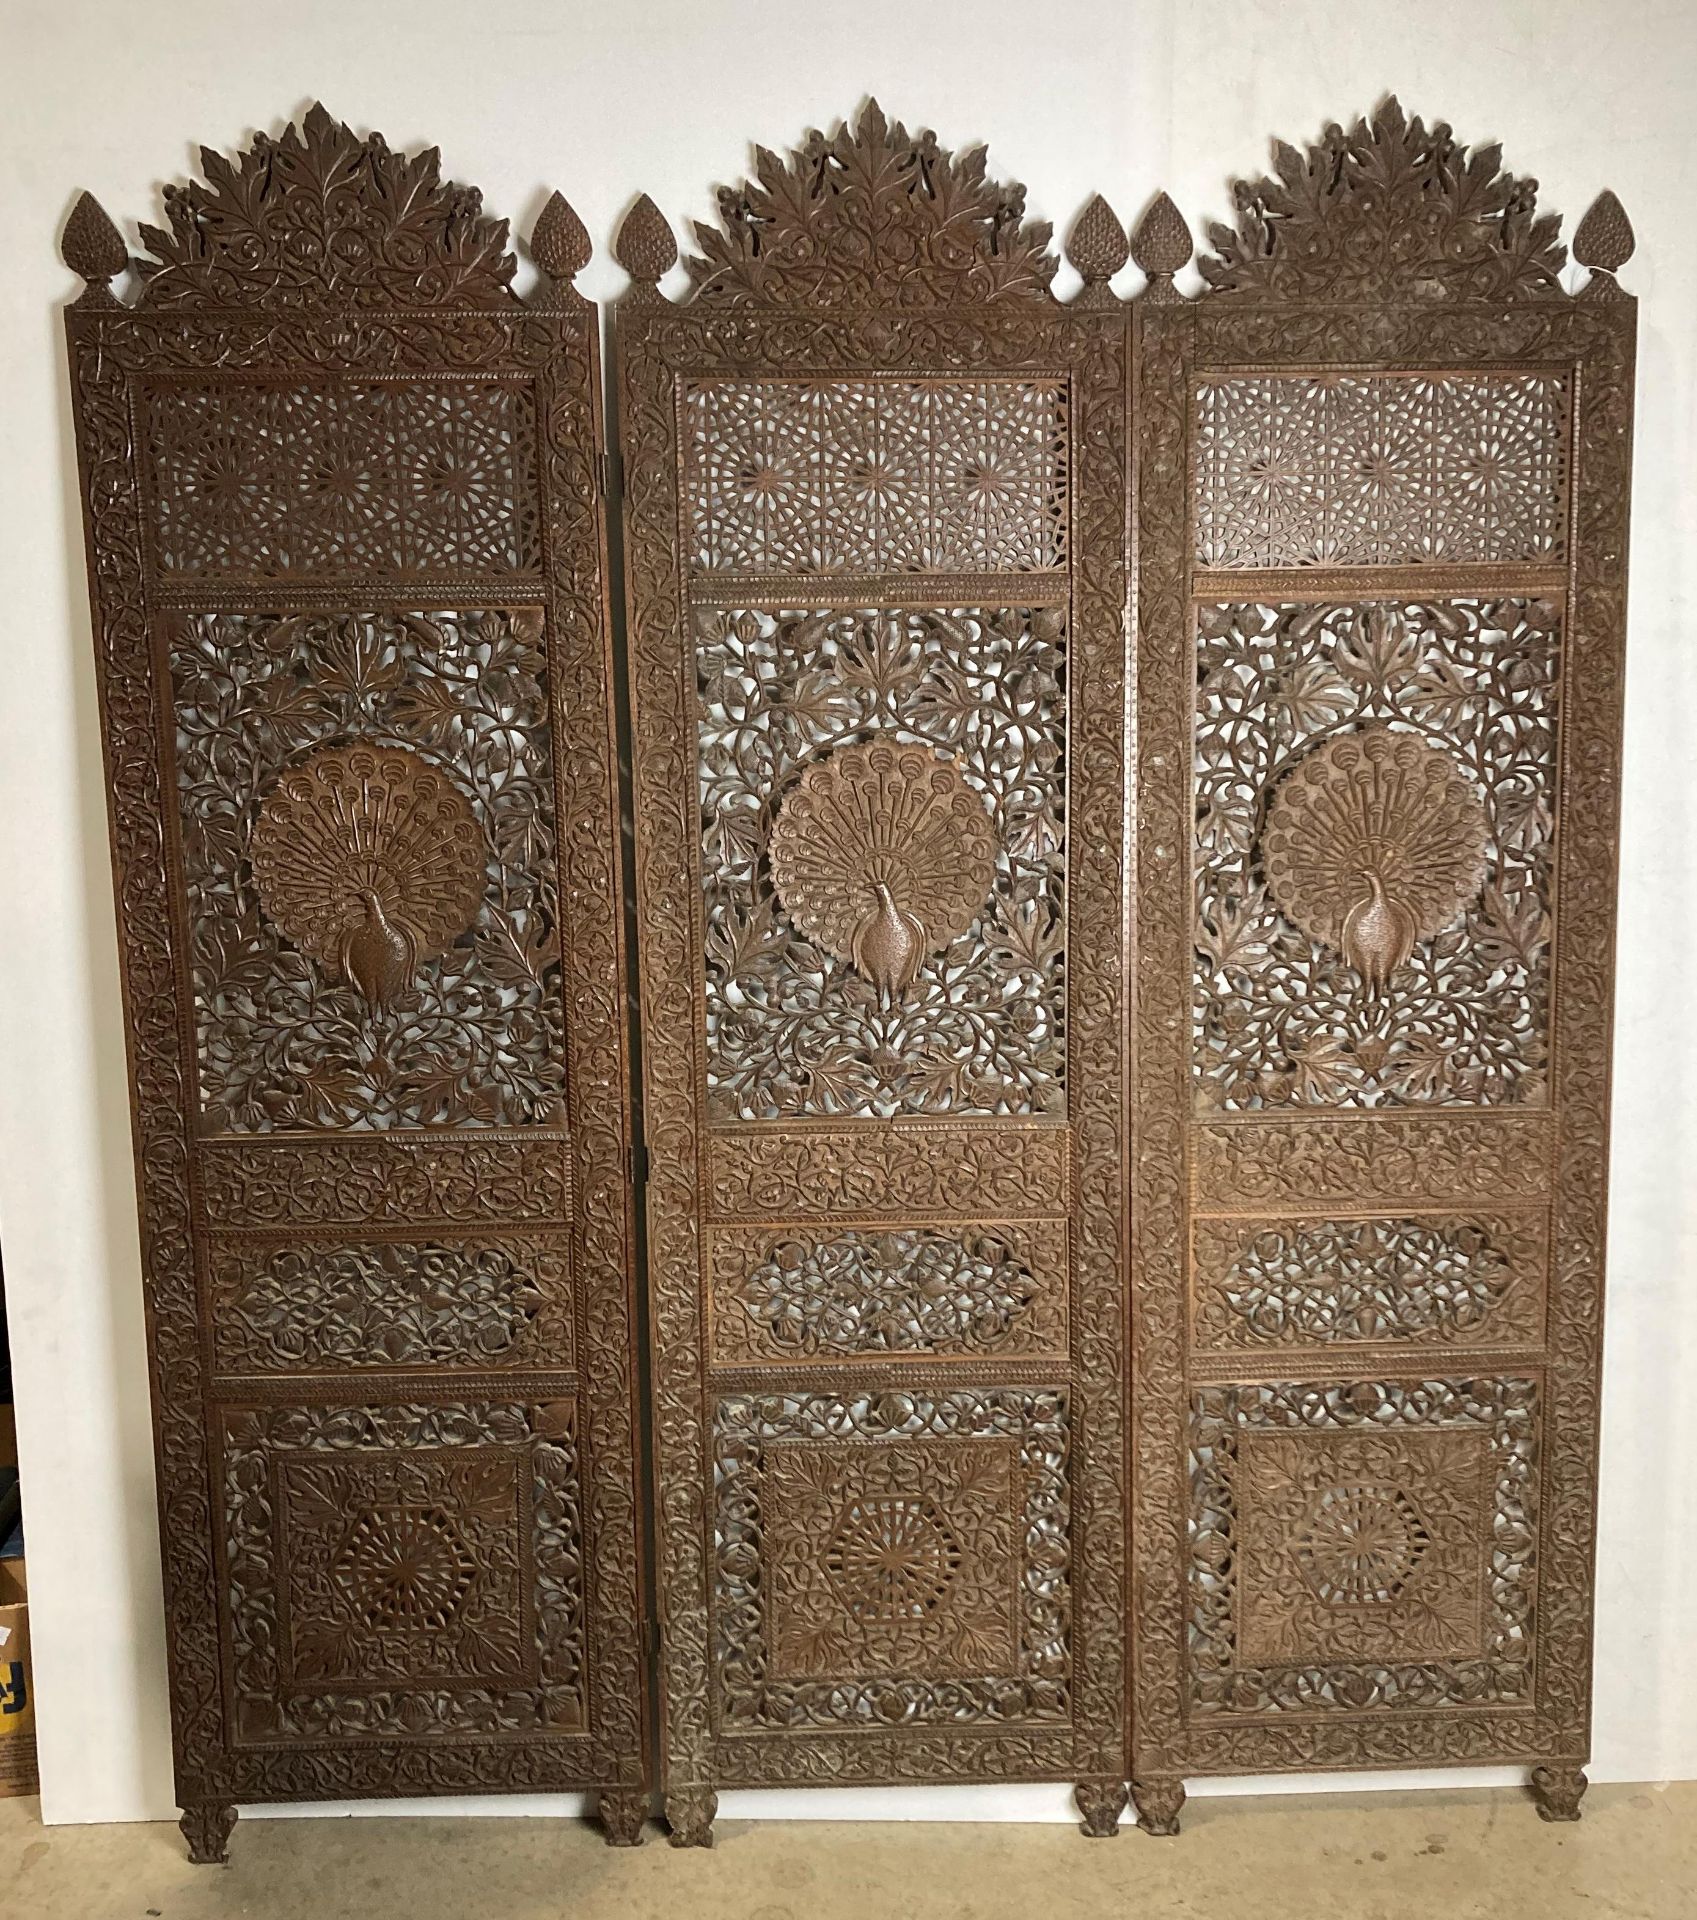 An Asian wooden hand-carved three-panel display screen with detailed peacock to each panel and